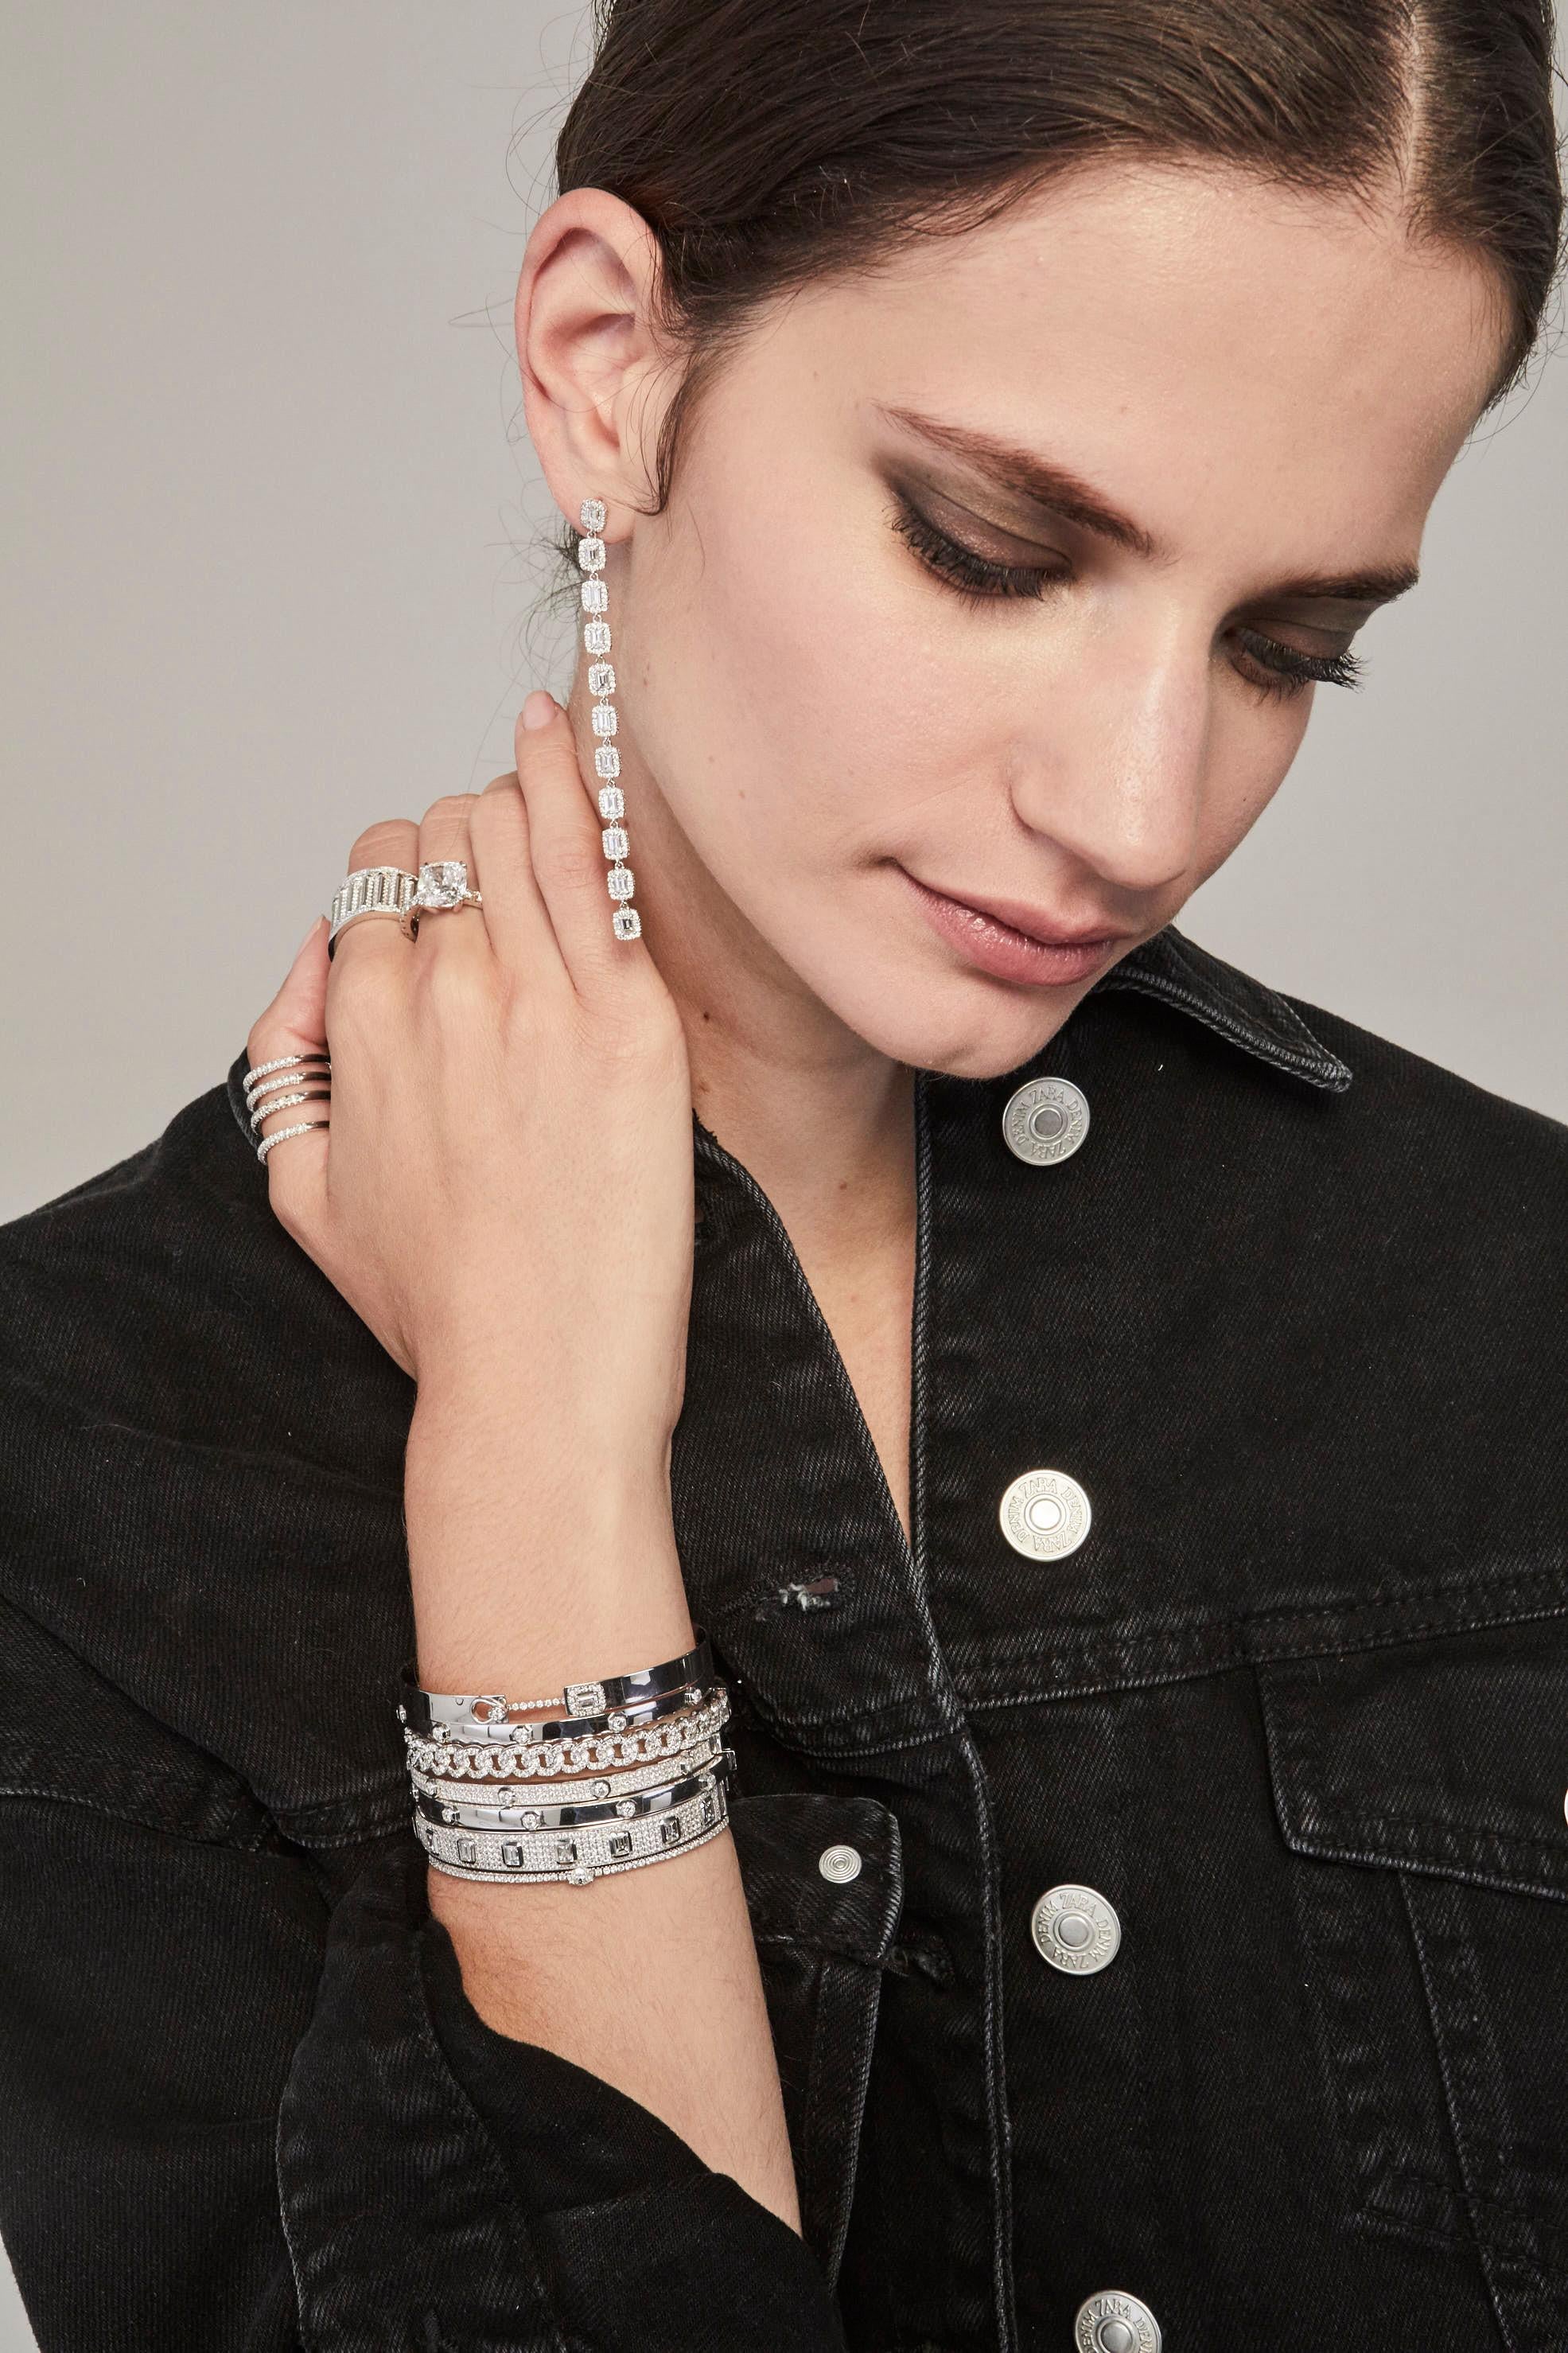 Frame Full Diamonds Bracelet / White Gold. Bracelet with 9 baguette white cut diamonds (ct. 1,59) with a pavé of 330 brilliant cut diamonds (ct. 1,70) set in white gold 18Kt

Contemporary, casual and smart bangles composed by diamond pavé, plain